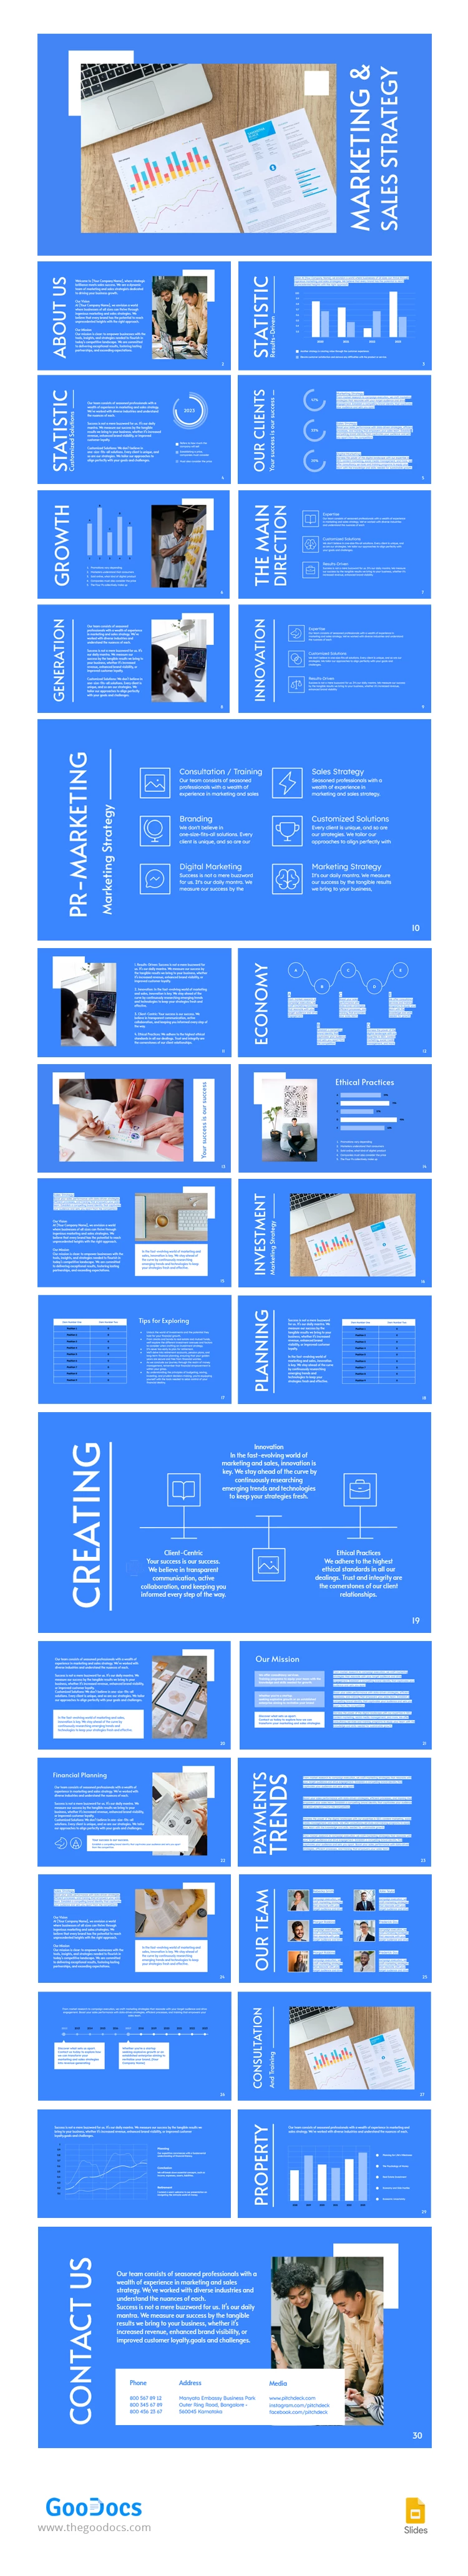 Marketing and Sales Strategy Pitch Deck - free Google Docs Template - 10067054